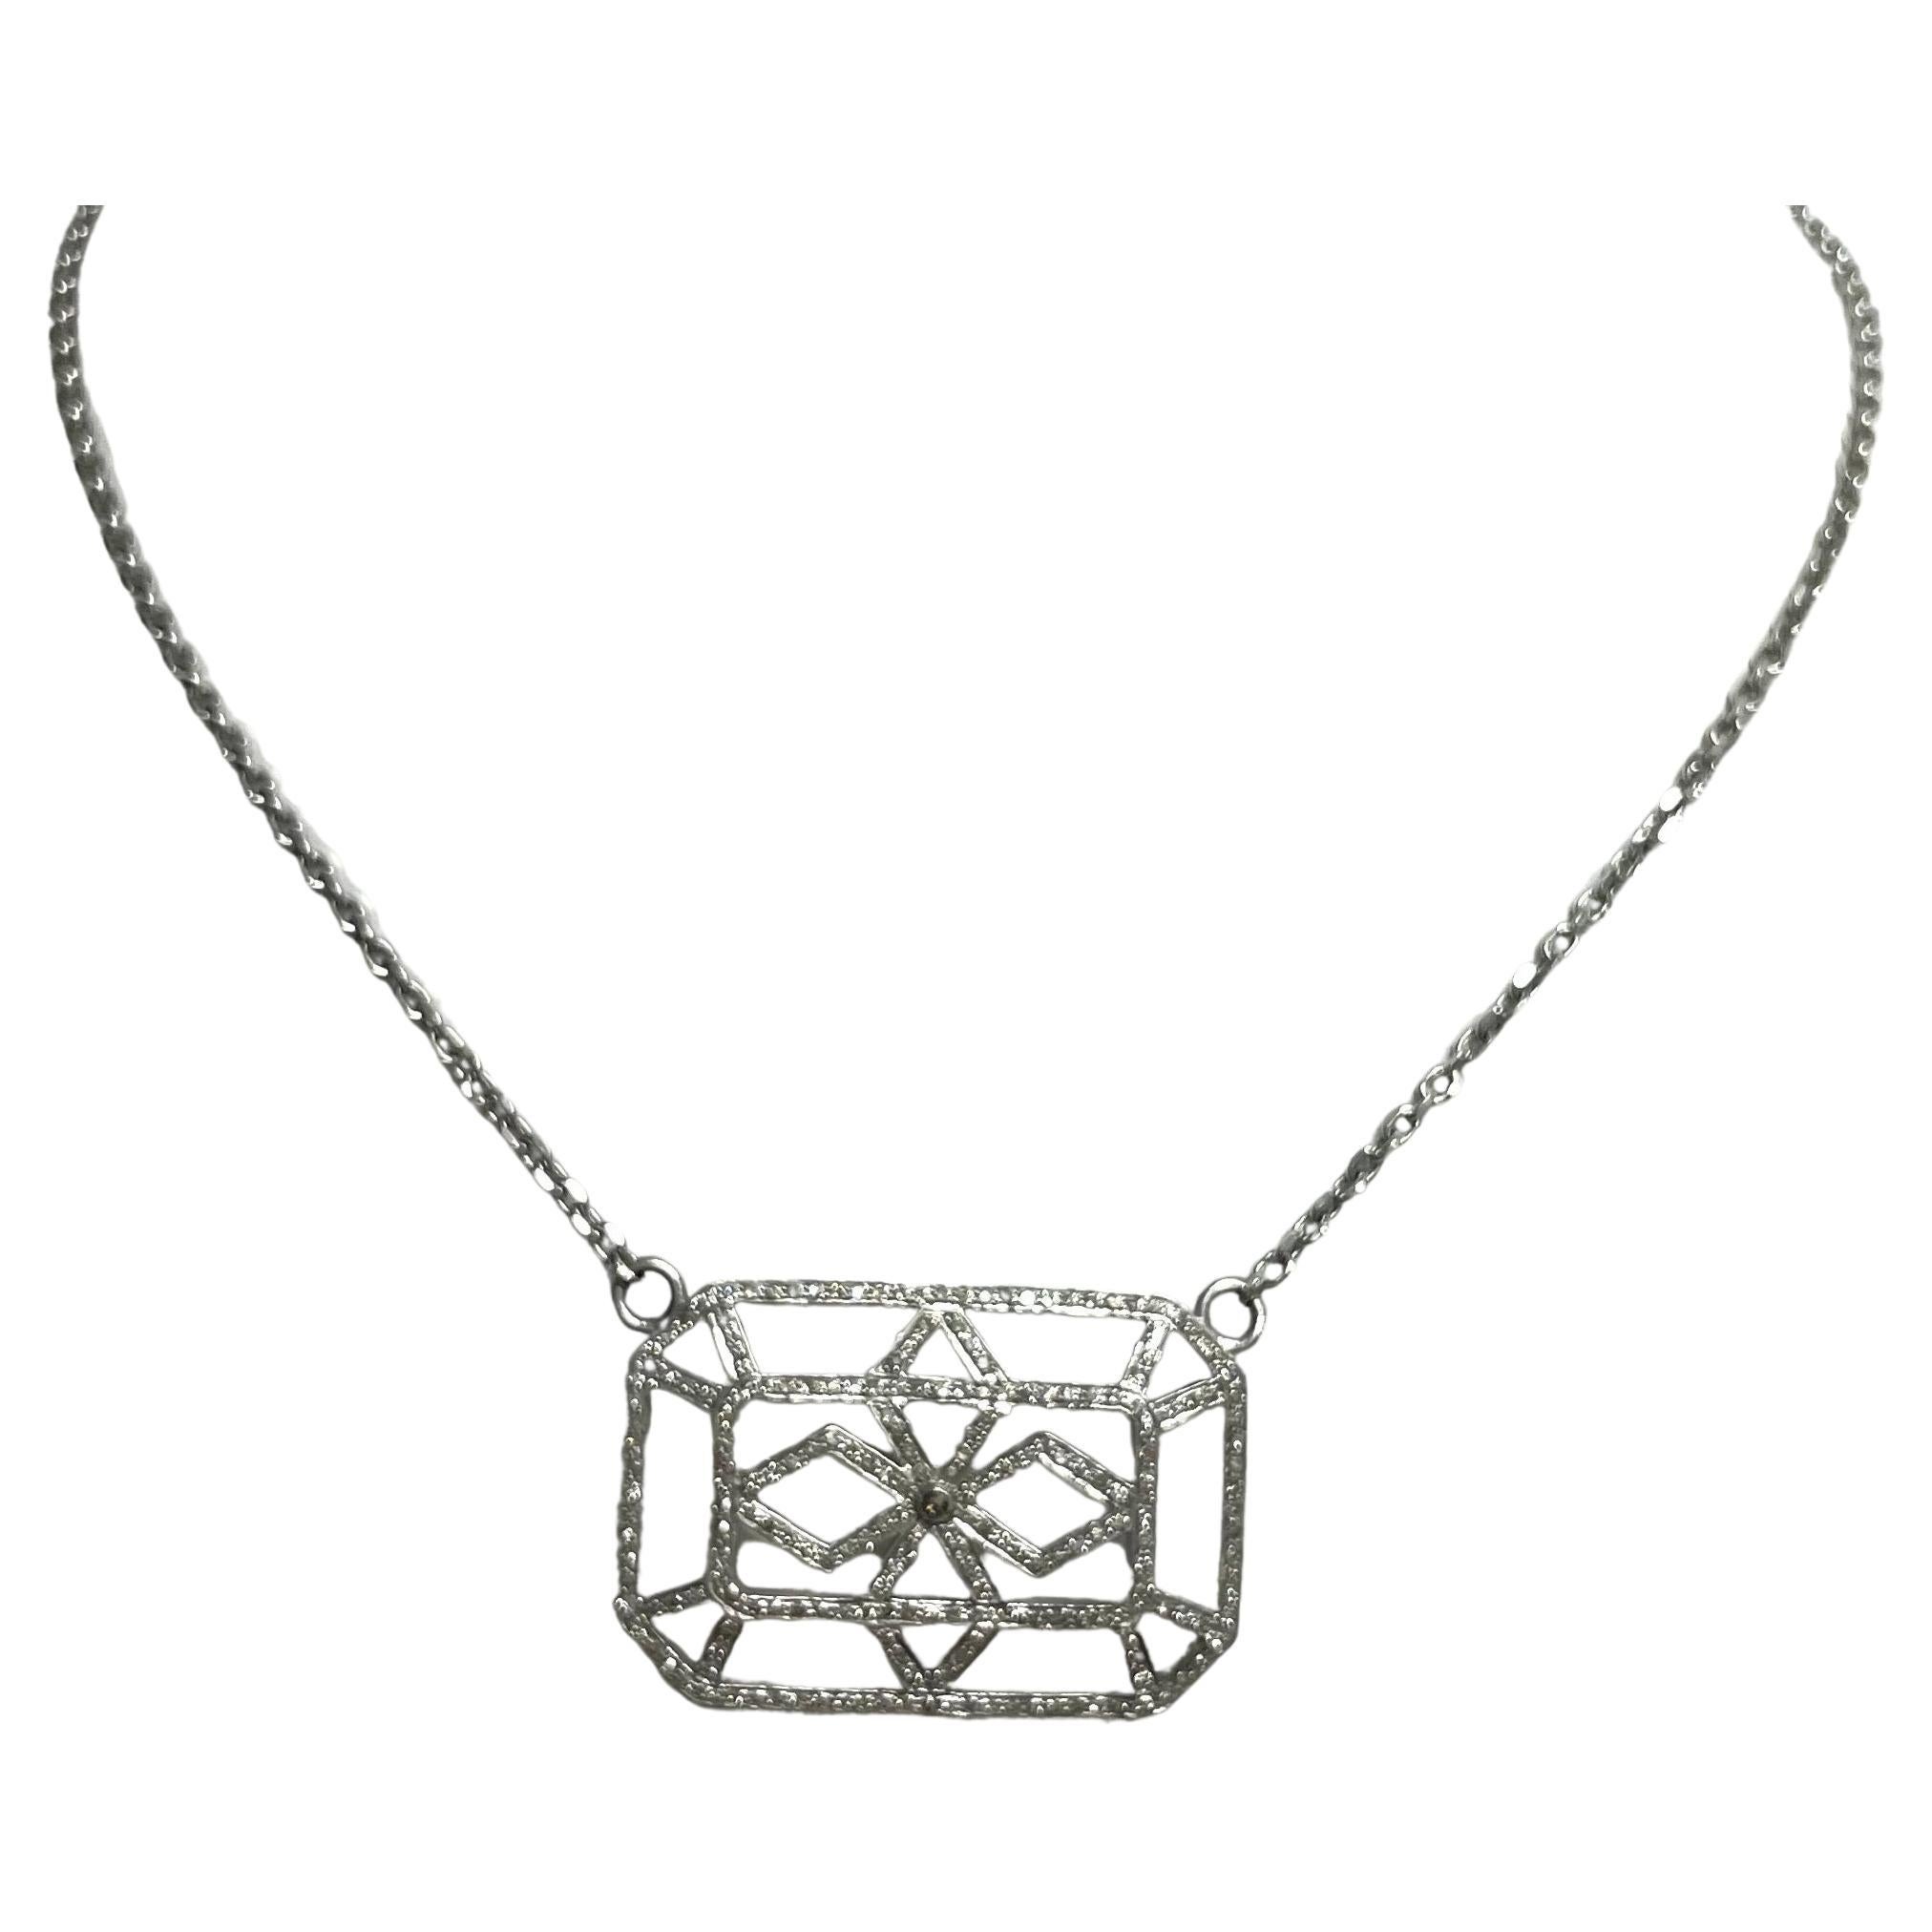 Description
Fashionable large pave diamond rectangular pendant on a diamond cut 14k white gold chain.
Item # N3727

Materials and Weight
Pave diamonds 2cts, 24 x 34mm, rectangle shape
Rhodium sterling silver
14k white gold chain

Dimensions
Length